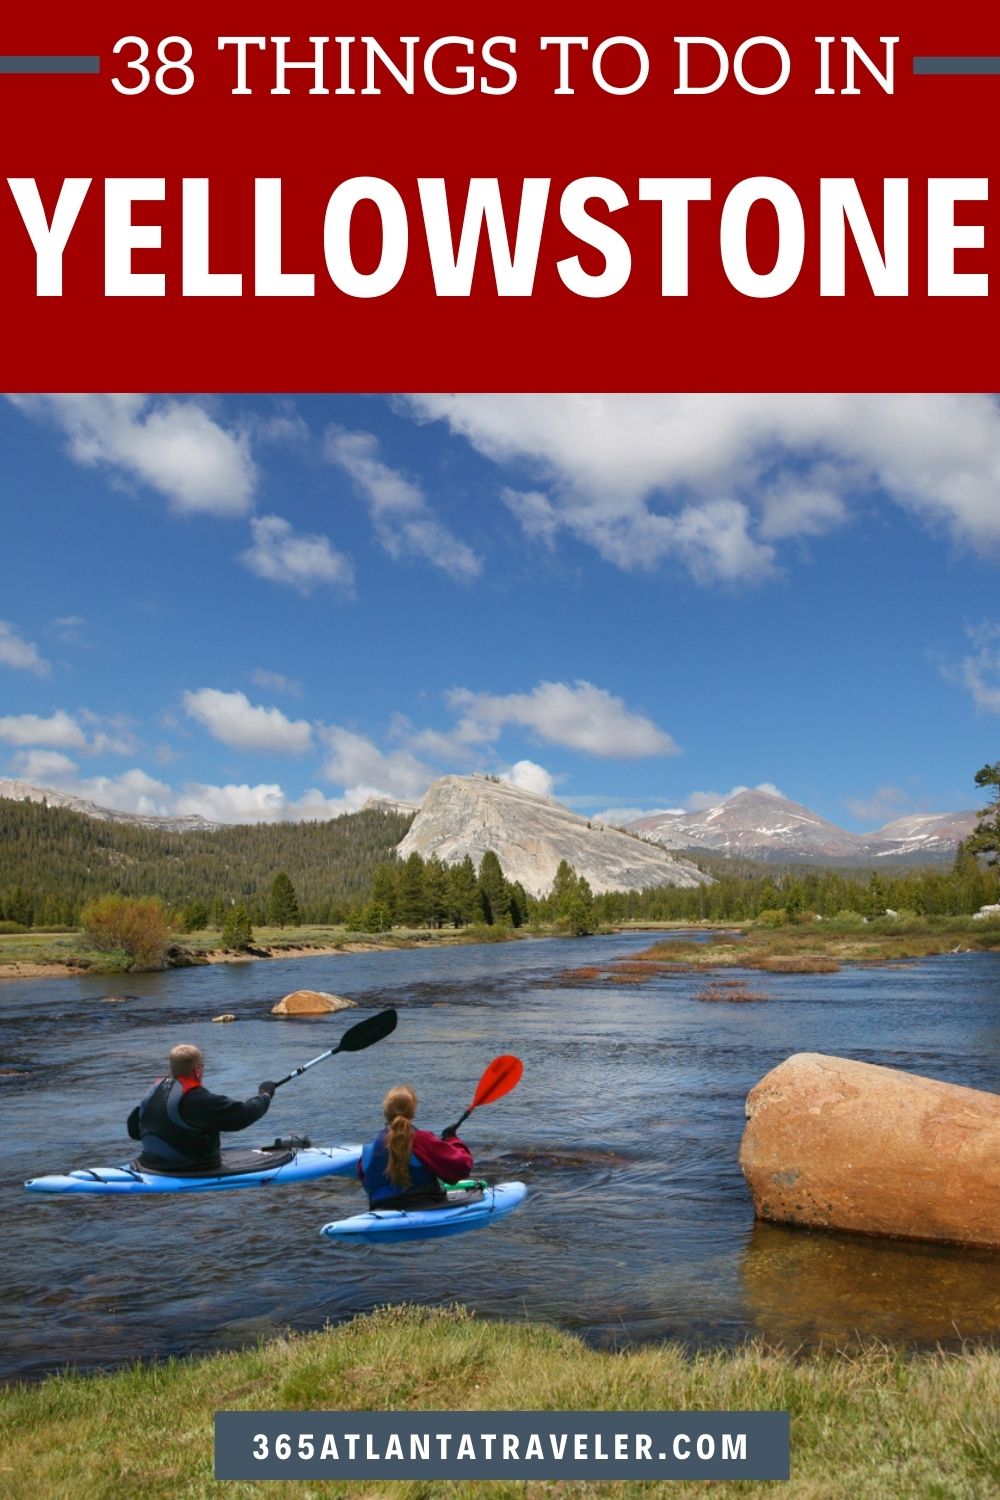 38 BEST THINGS TO DO IN YELLOWSTONE NATIONAL PARK